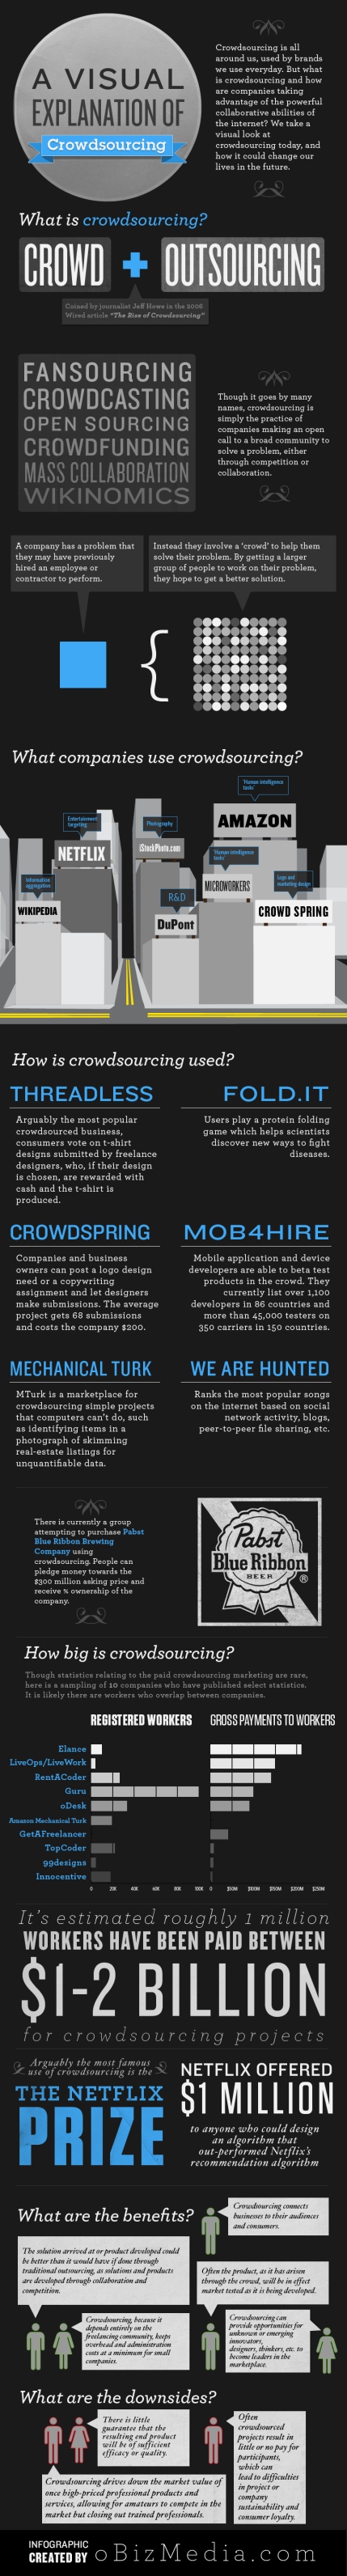 crowdsourcing-infographic-5